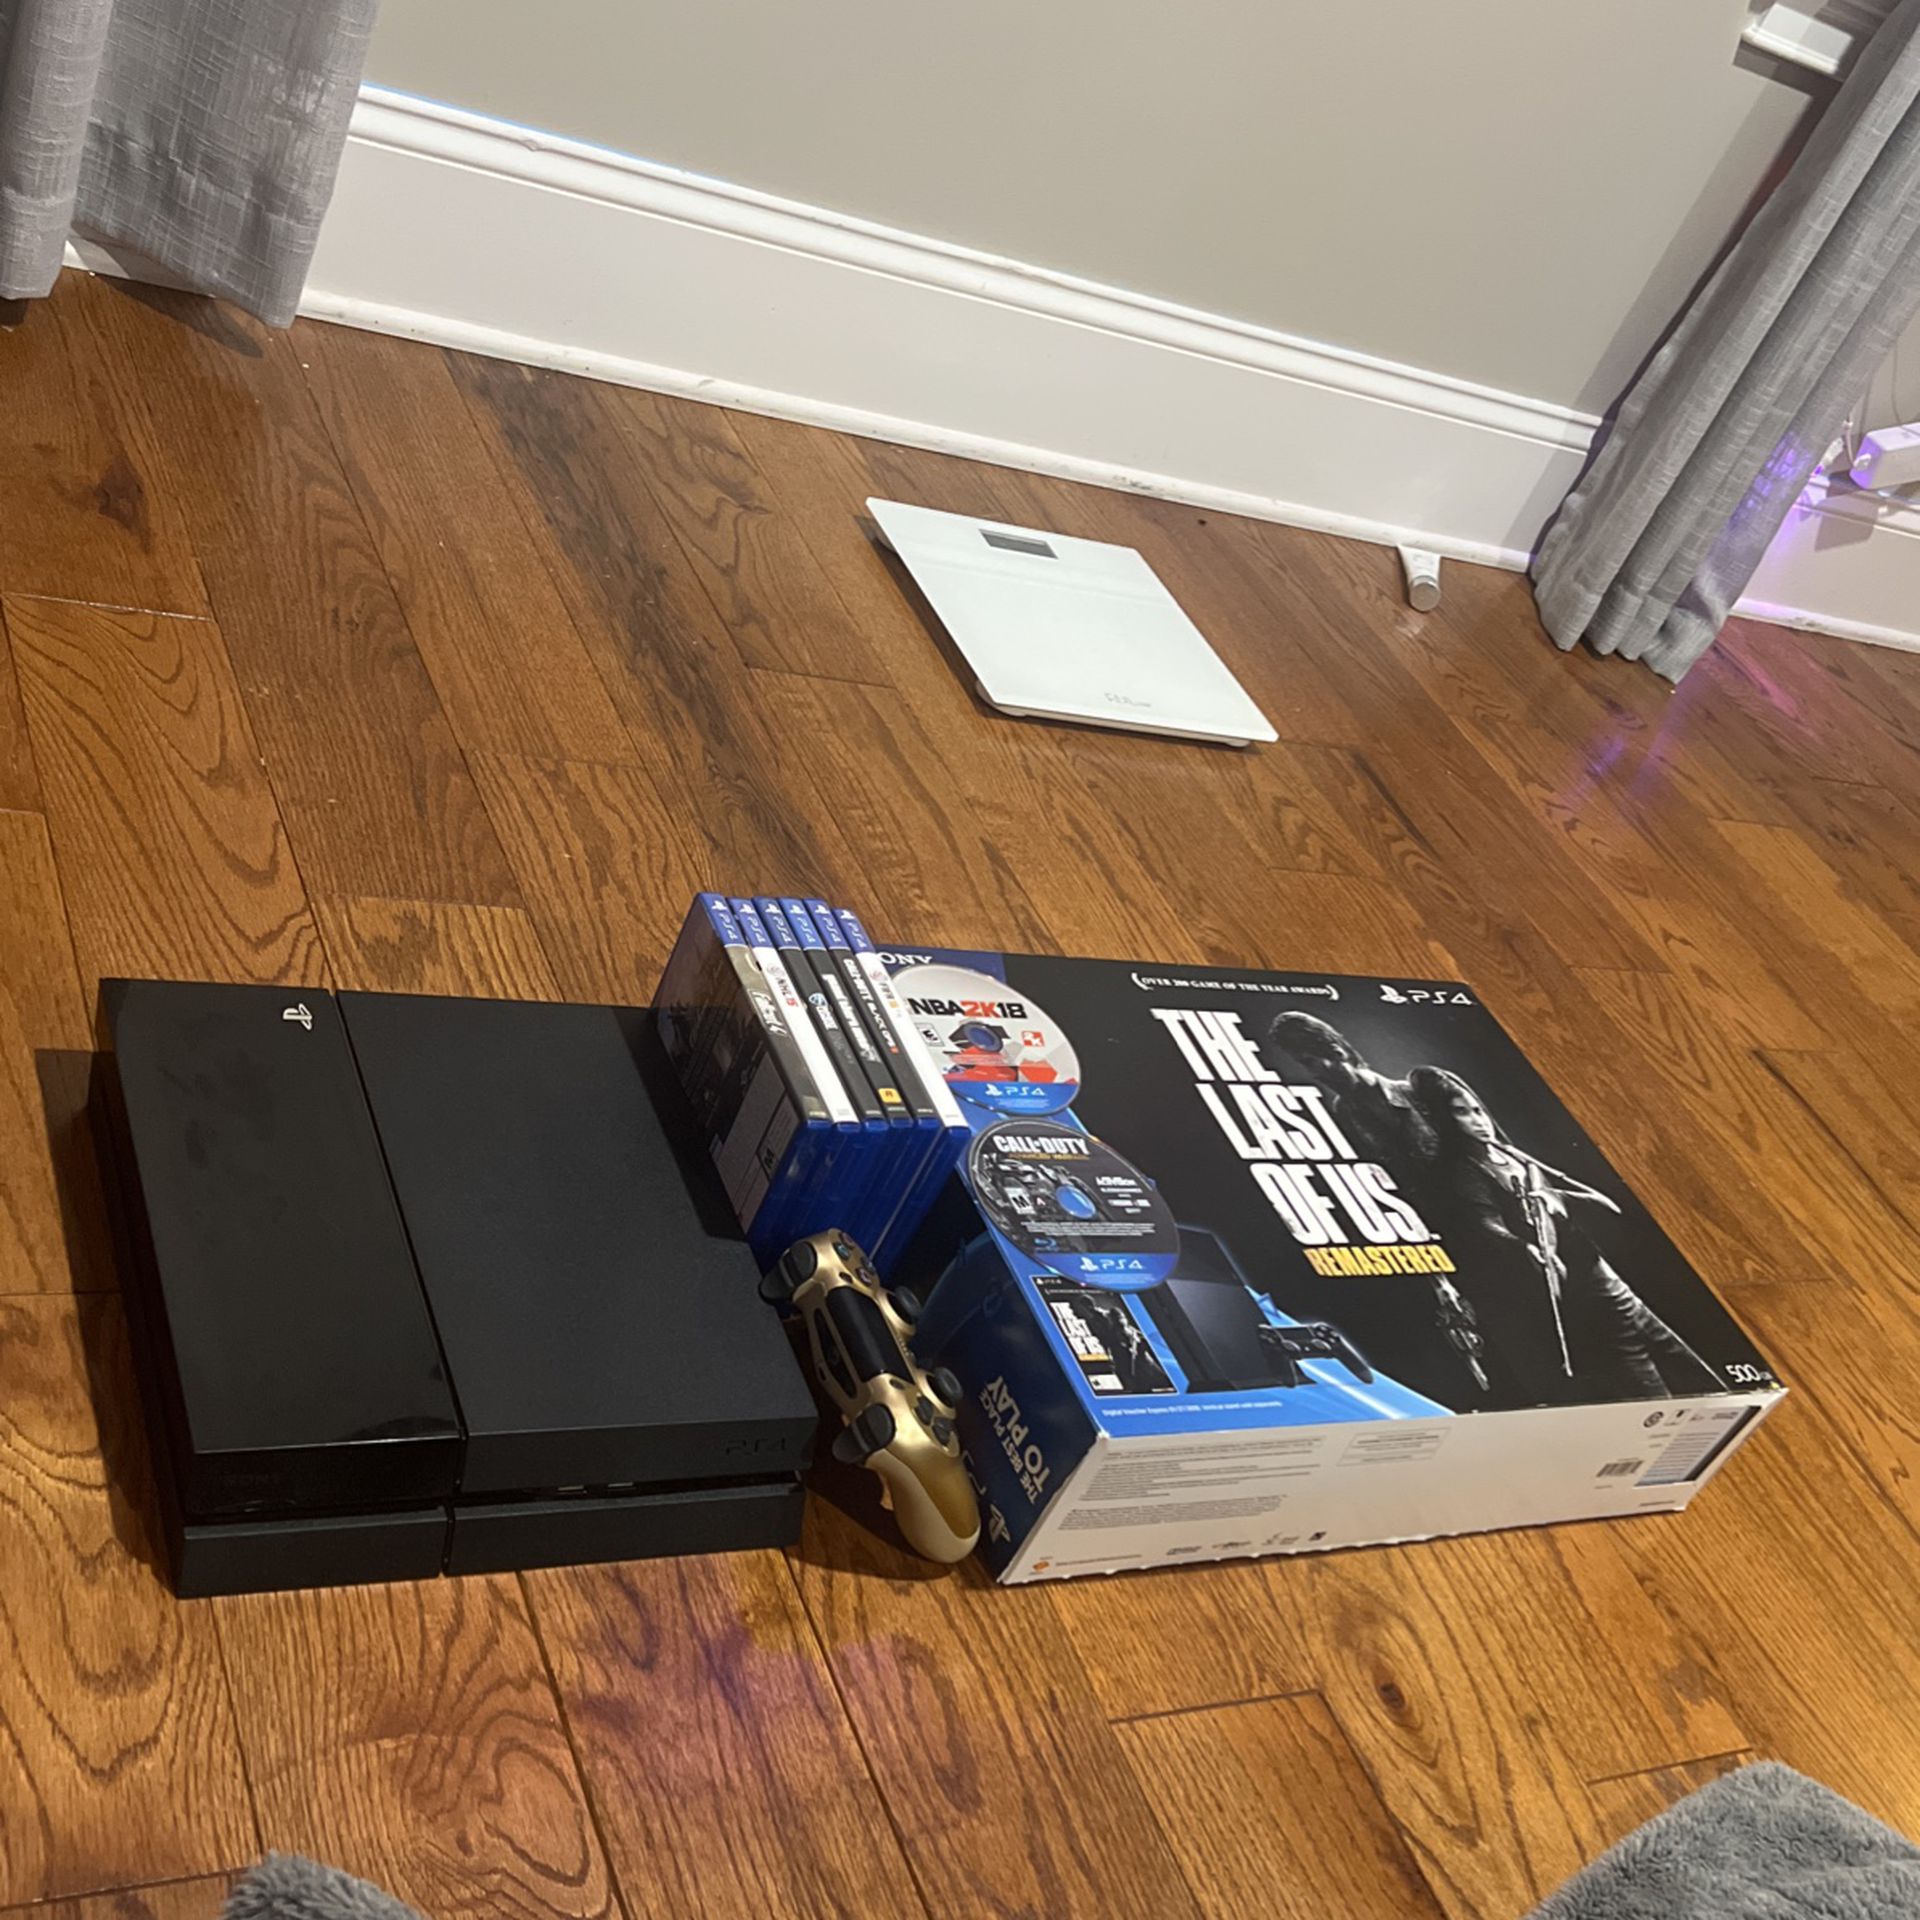 500GB PS4 comes with  ,8 games,  gold Controller,  Camo Turtle Beach  headset,   Ps4 box and Chords